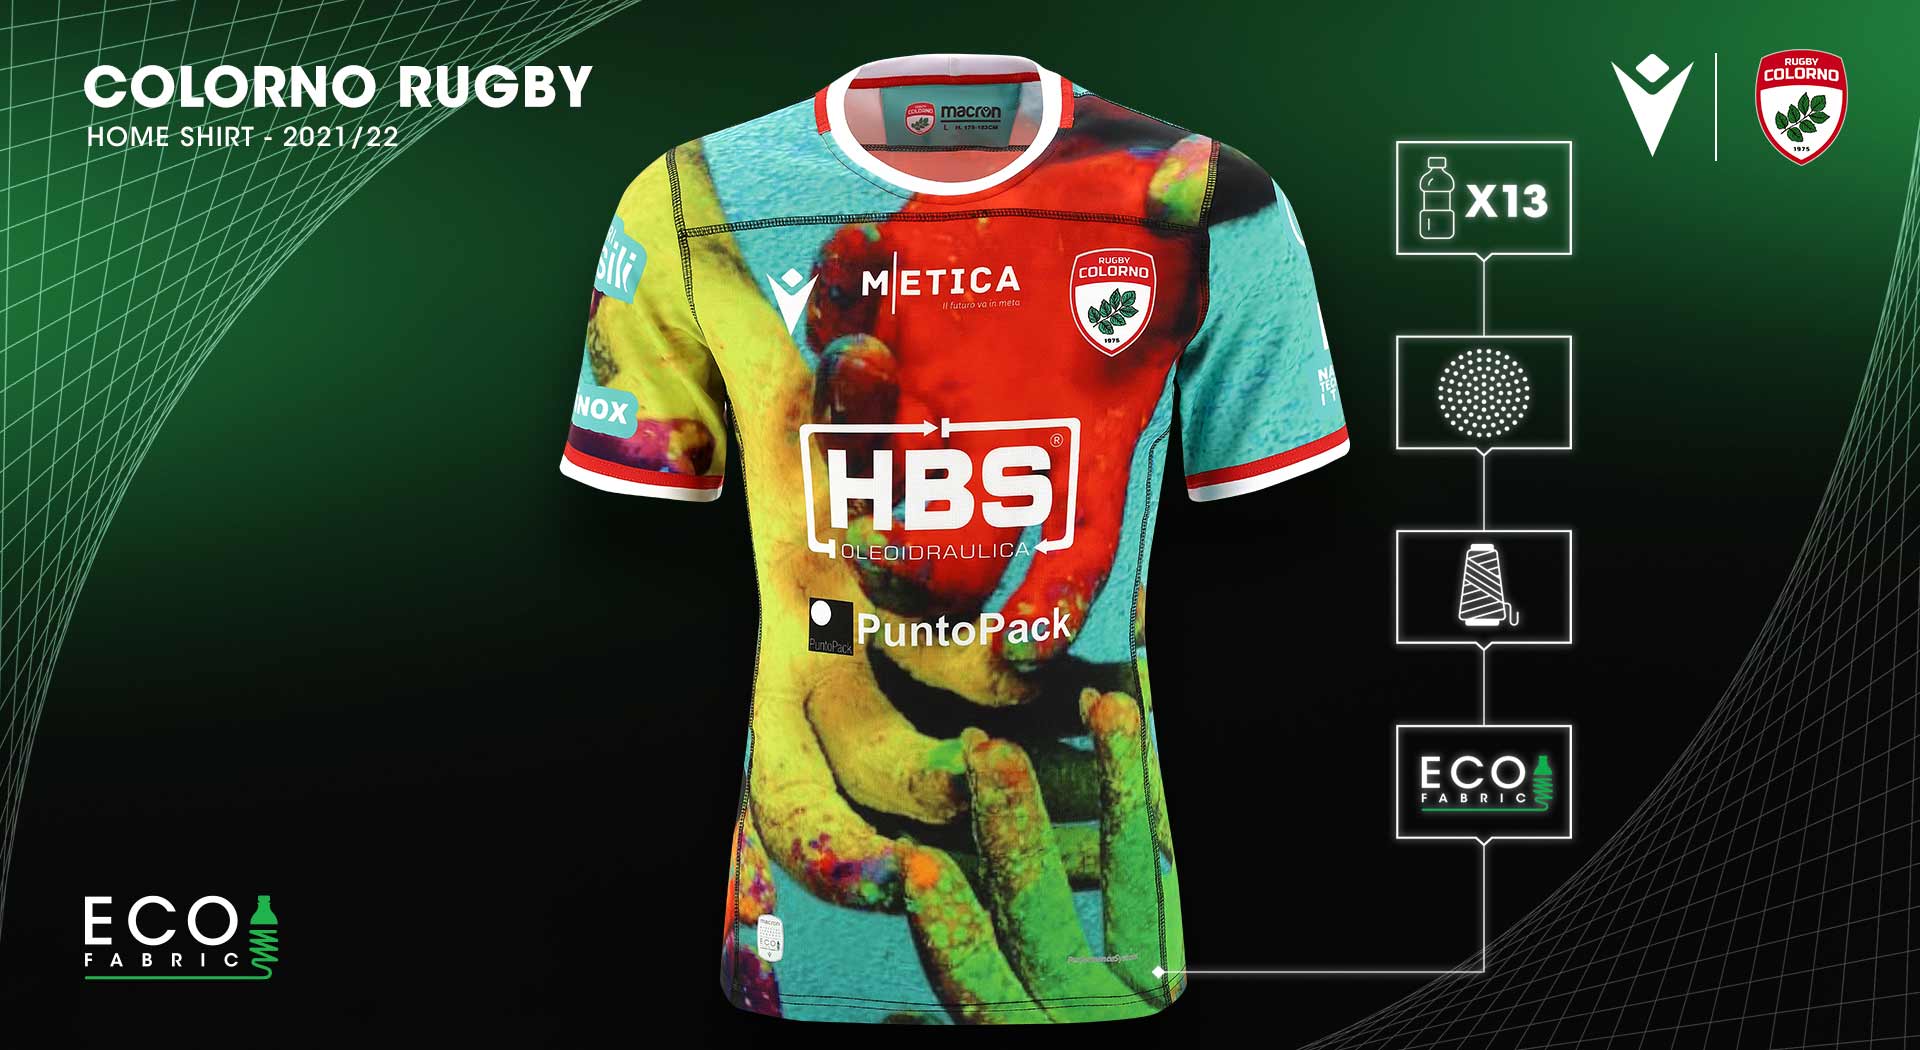 THE NEW RUGBY COLORNO SHIRTS FEATURING MESSAGES OF SOLIDARITY, INCLUSION,  GENDER EQUALITY AND SUSTAINABILITY | Weltweiter Versand